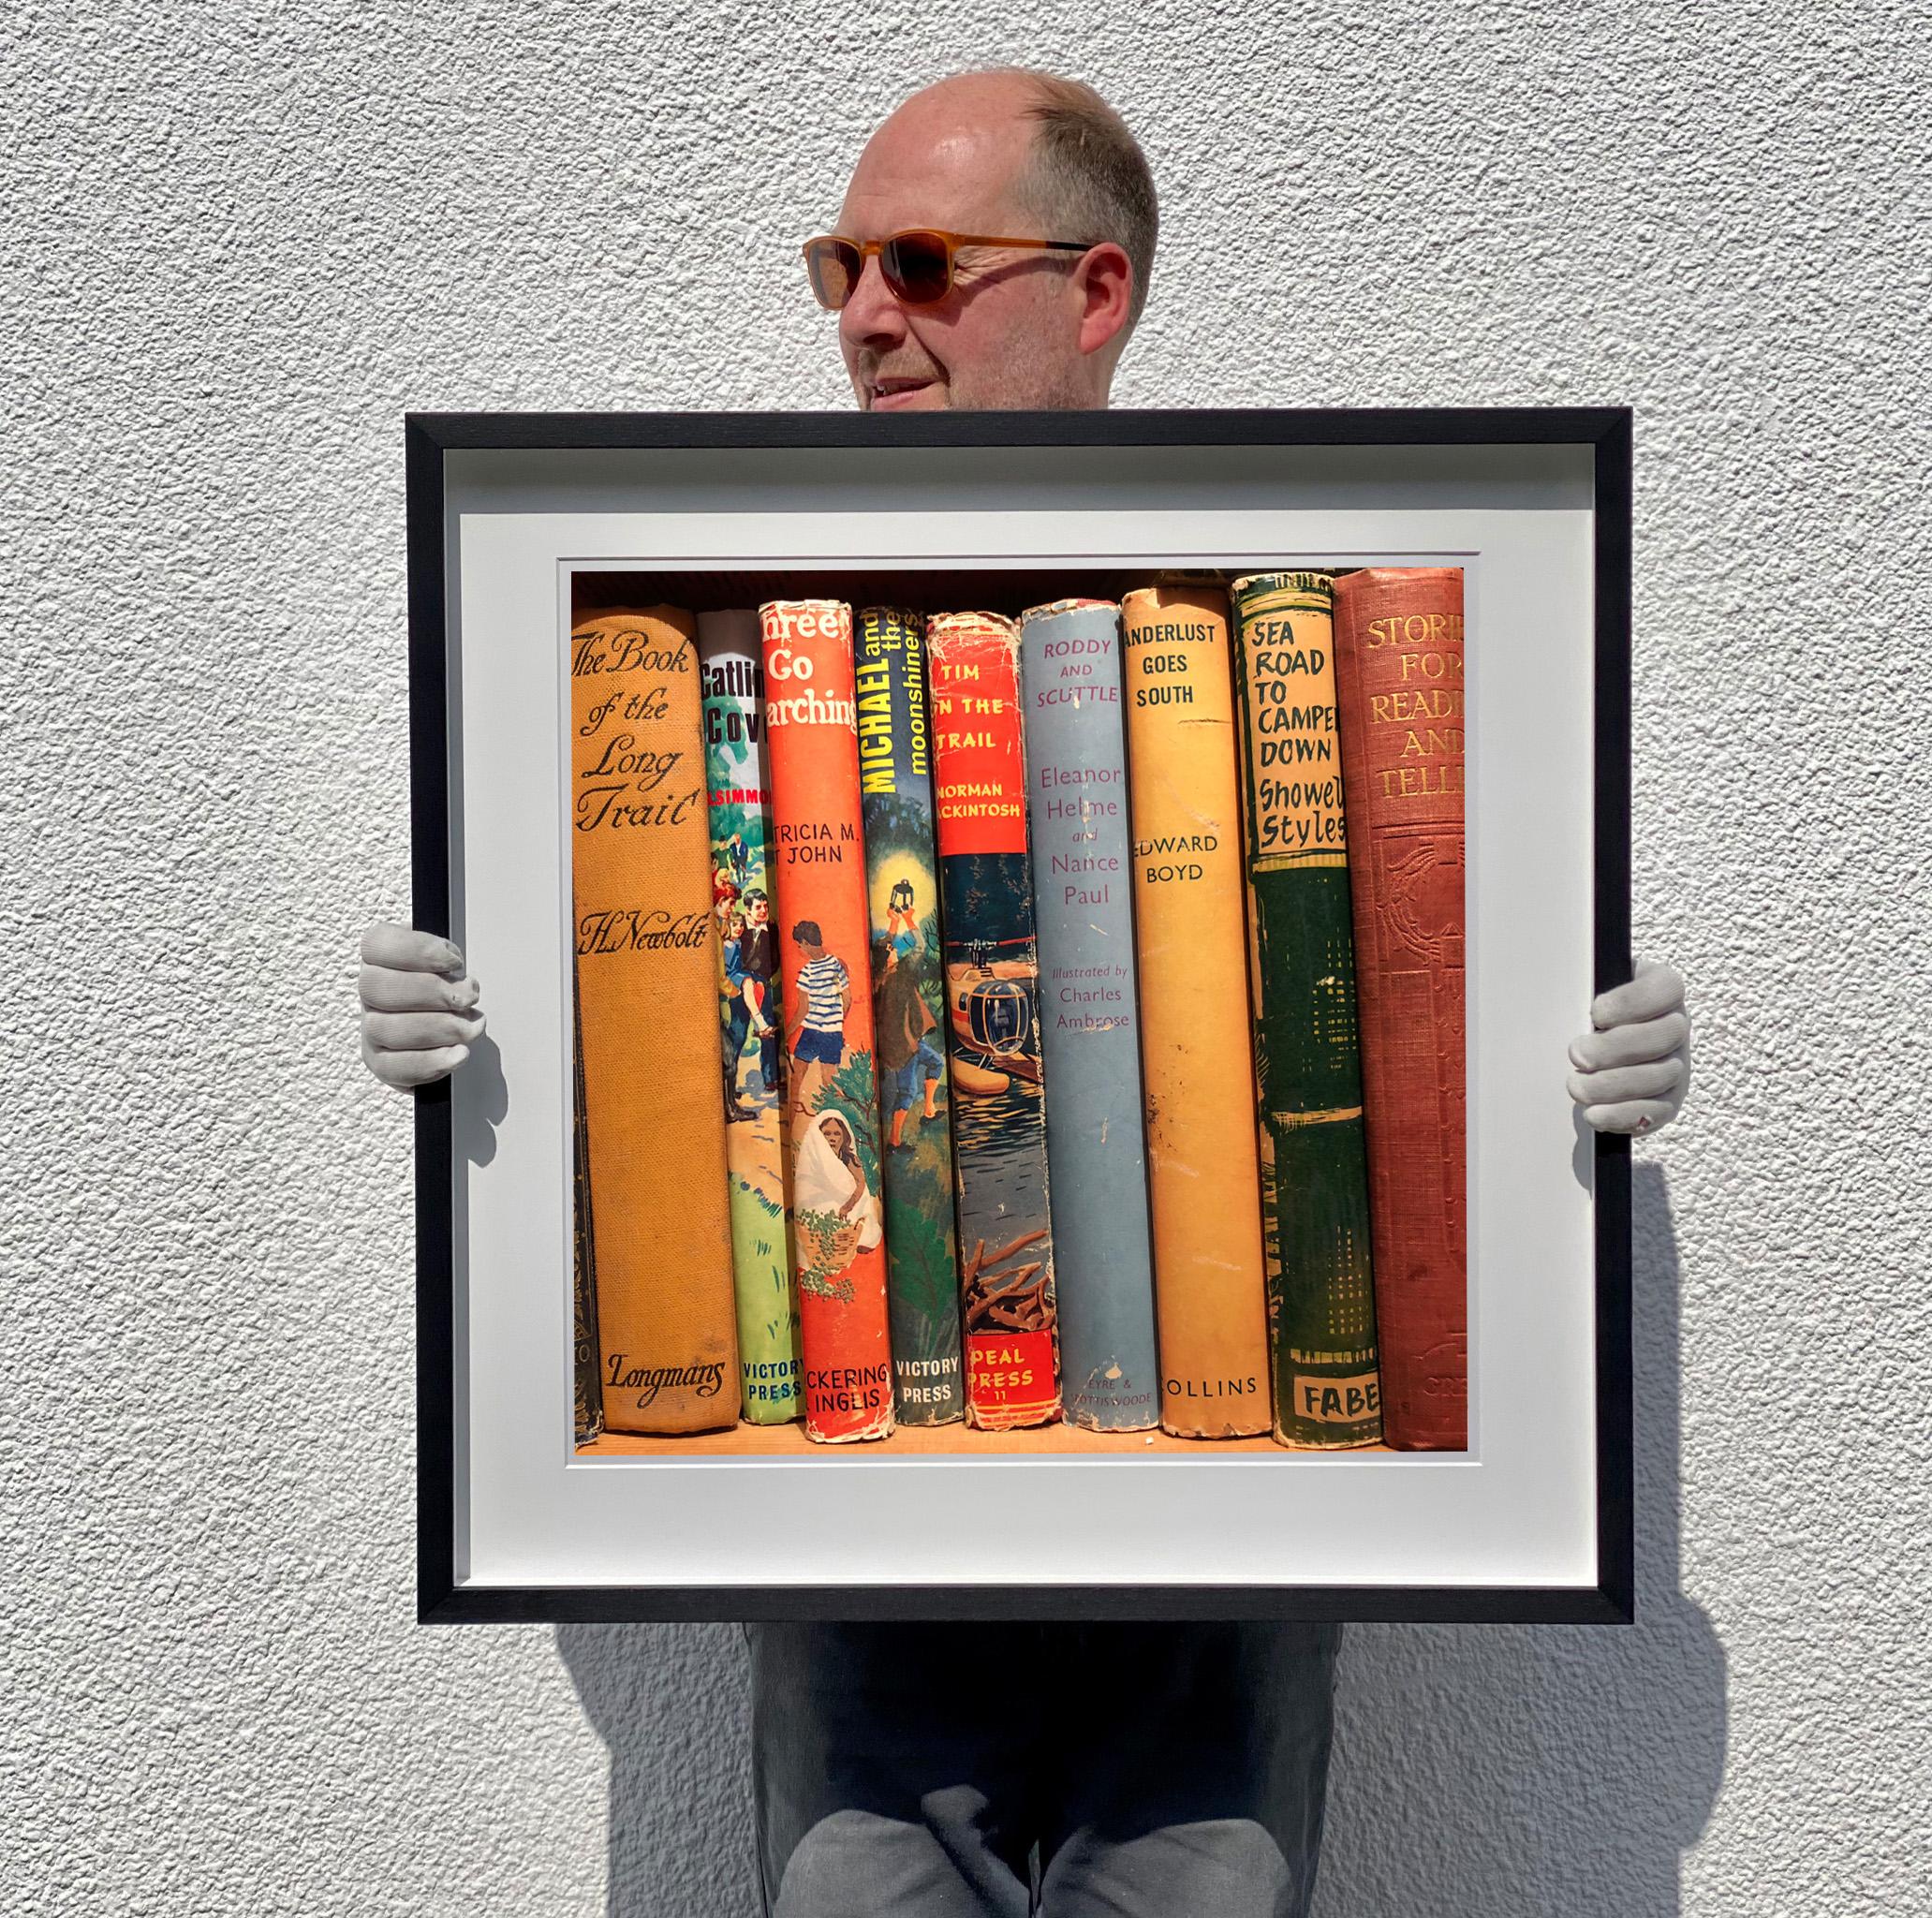 Wanderlust Goes South, Sheringham, Norfolk - Vintage Book Spines Photo - Contemporary Photograph by Richard Heeps